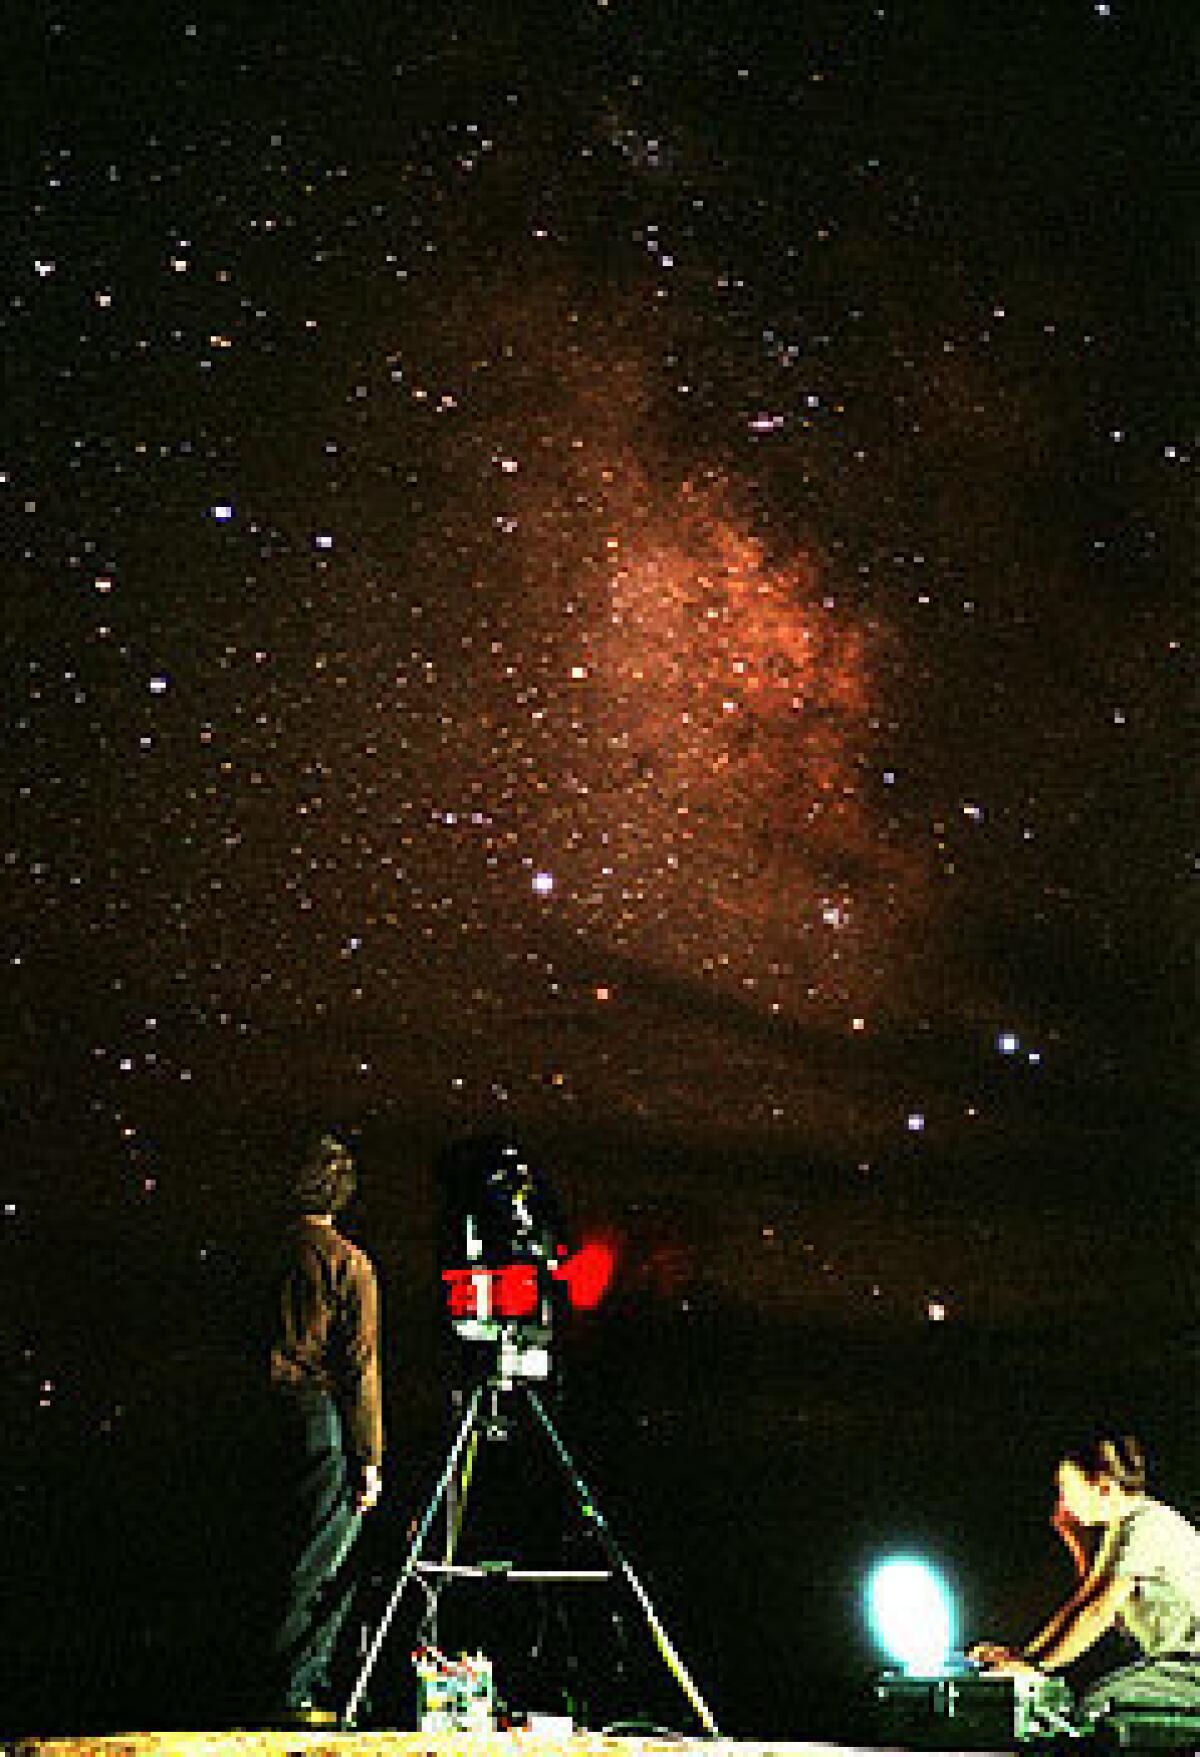 Scientists documenting the Milky Way.